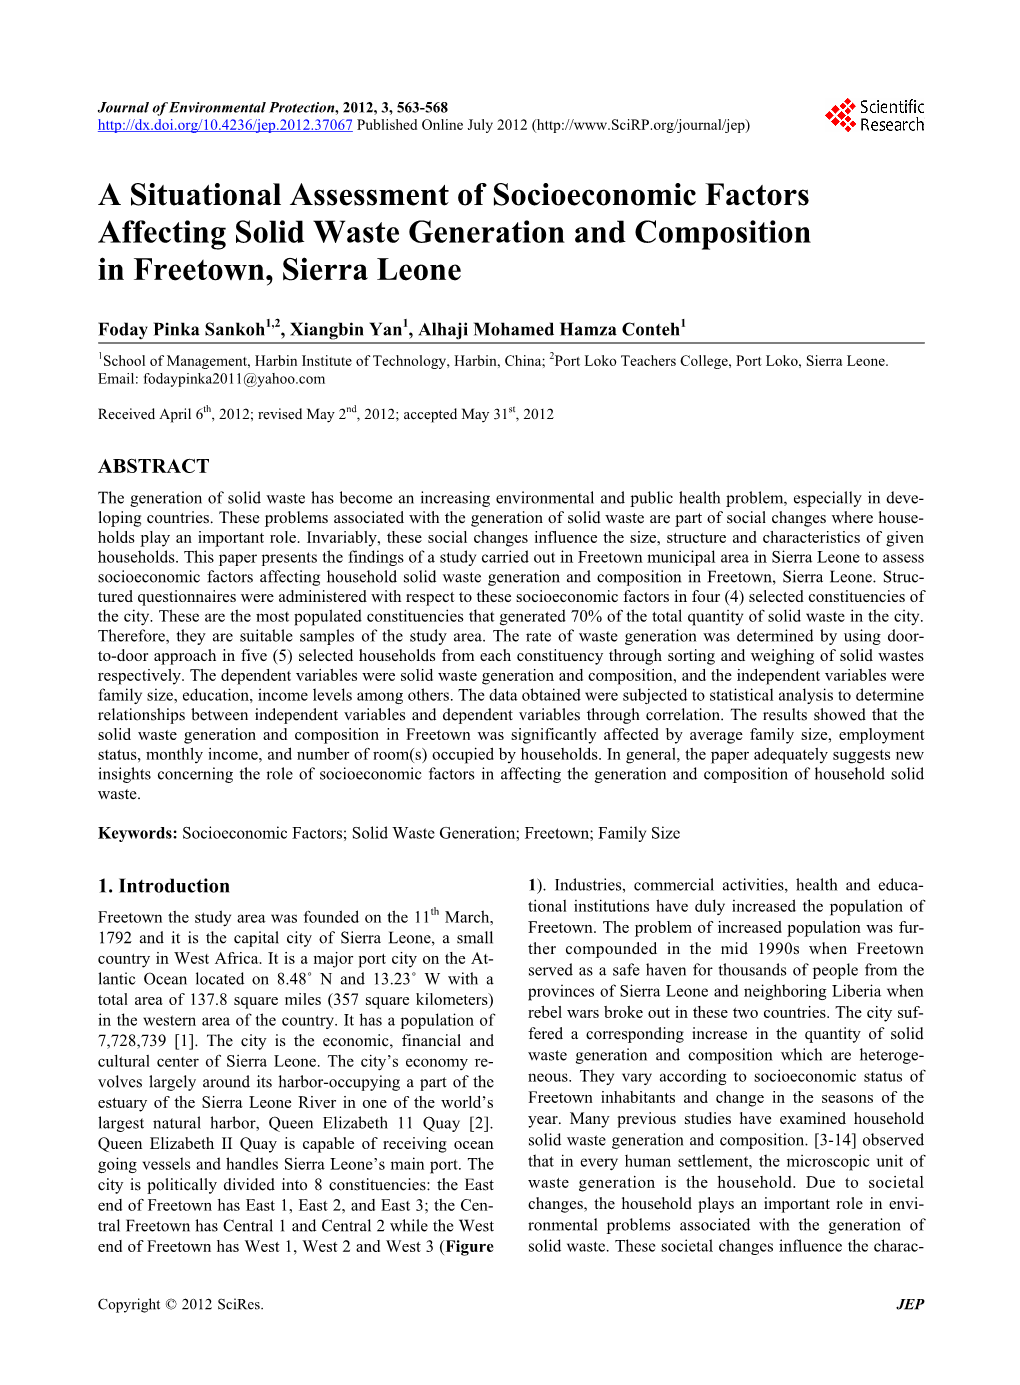 A Situational Assessment of Socioeconomic Factors Affecting Solid Waste Generation and Composition in Freetown, Sierra Leone